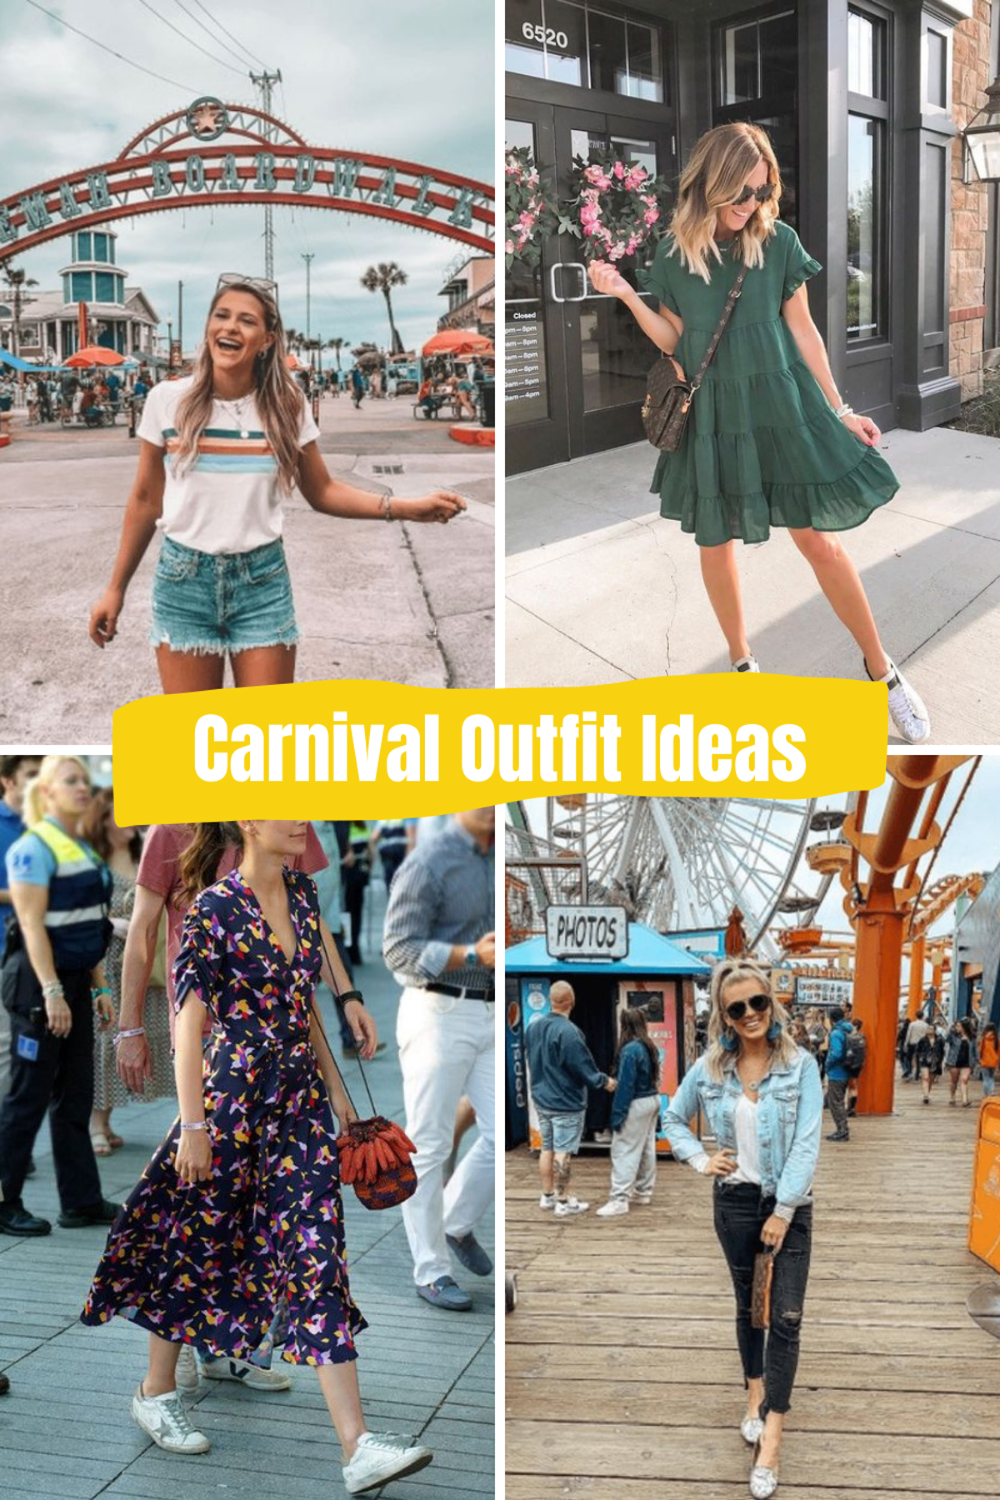 deborah kempe recommends Cute Outfits To Wear To A Carnival